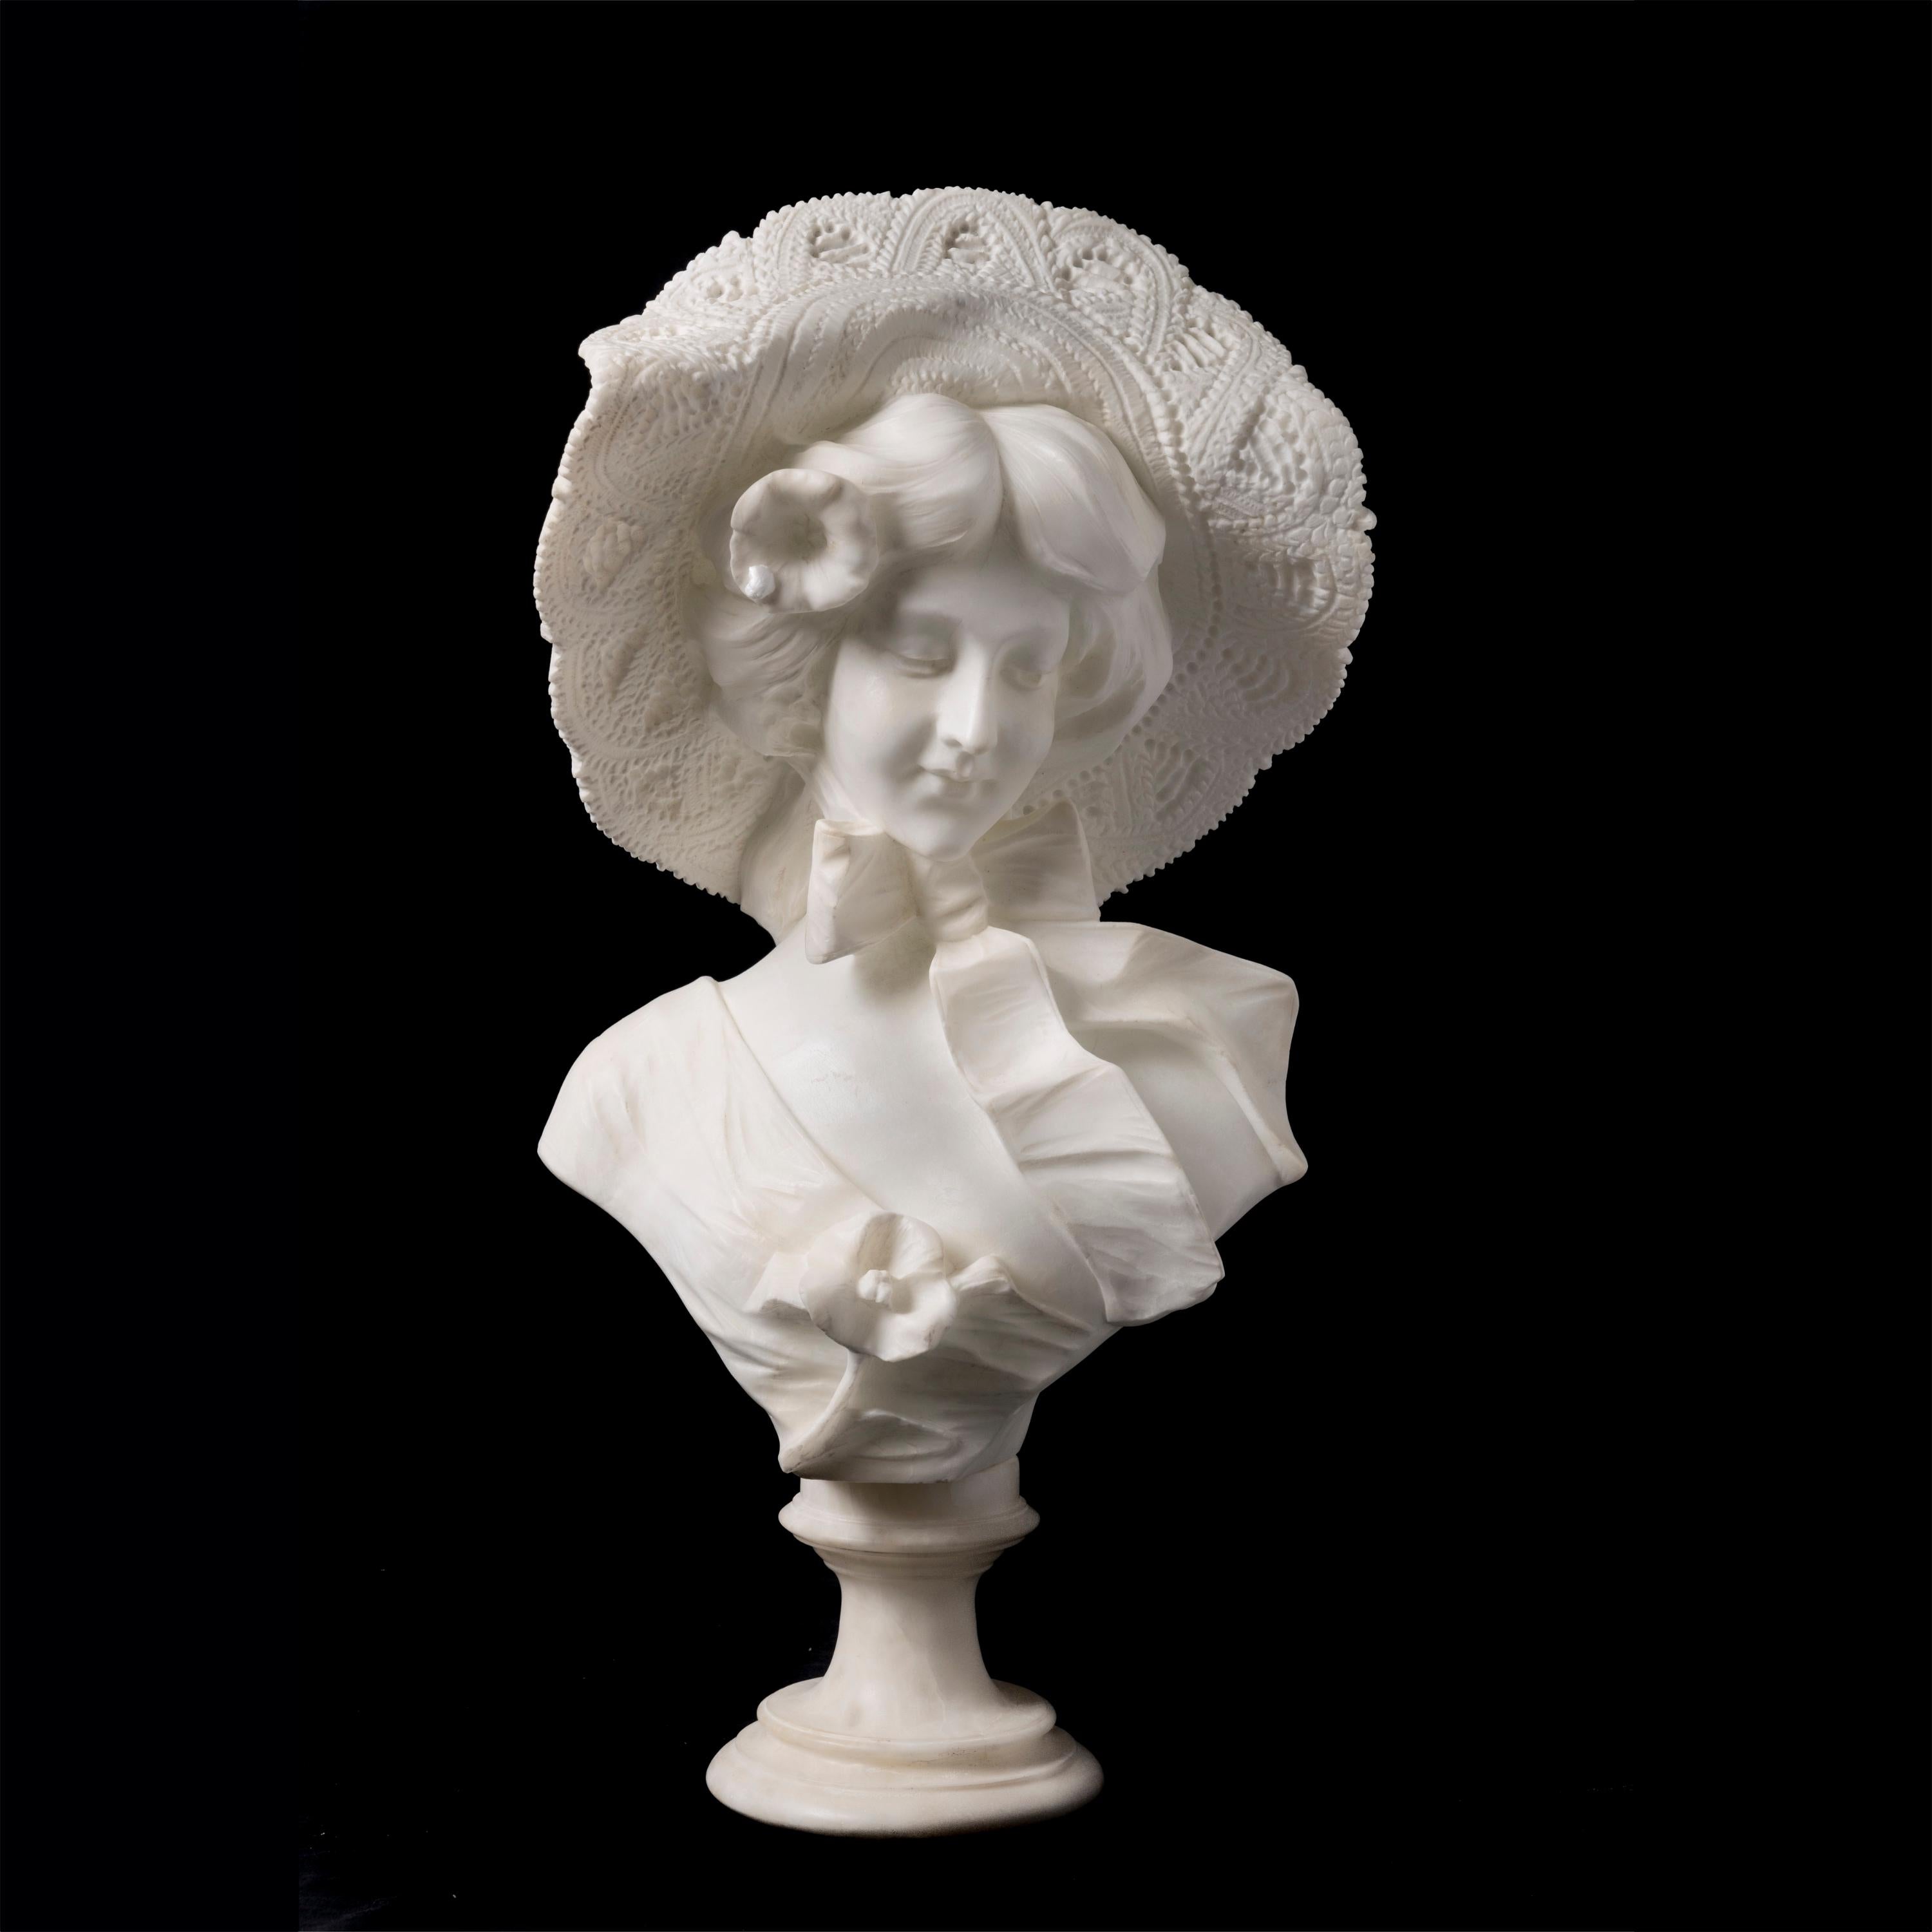 An alabaster bust of a lady wearing a bow around her neck, her large hat gently perched on her coiffed hair. Signed 